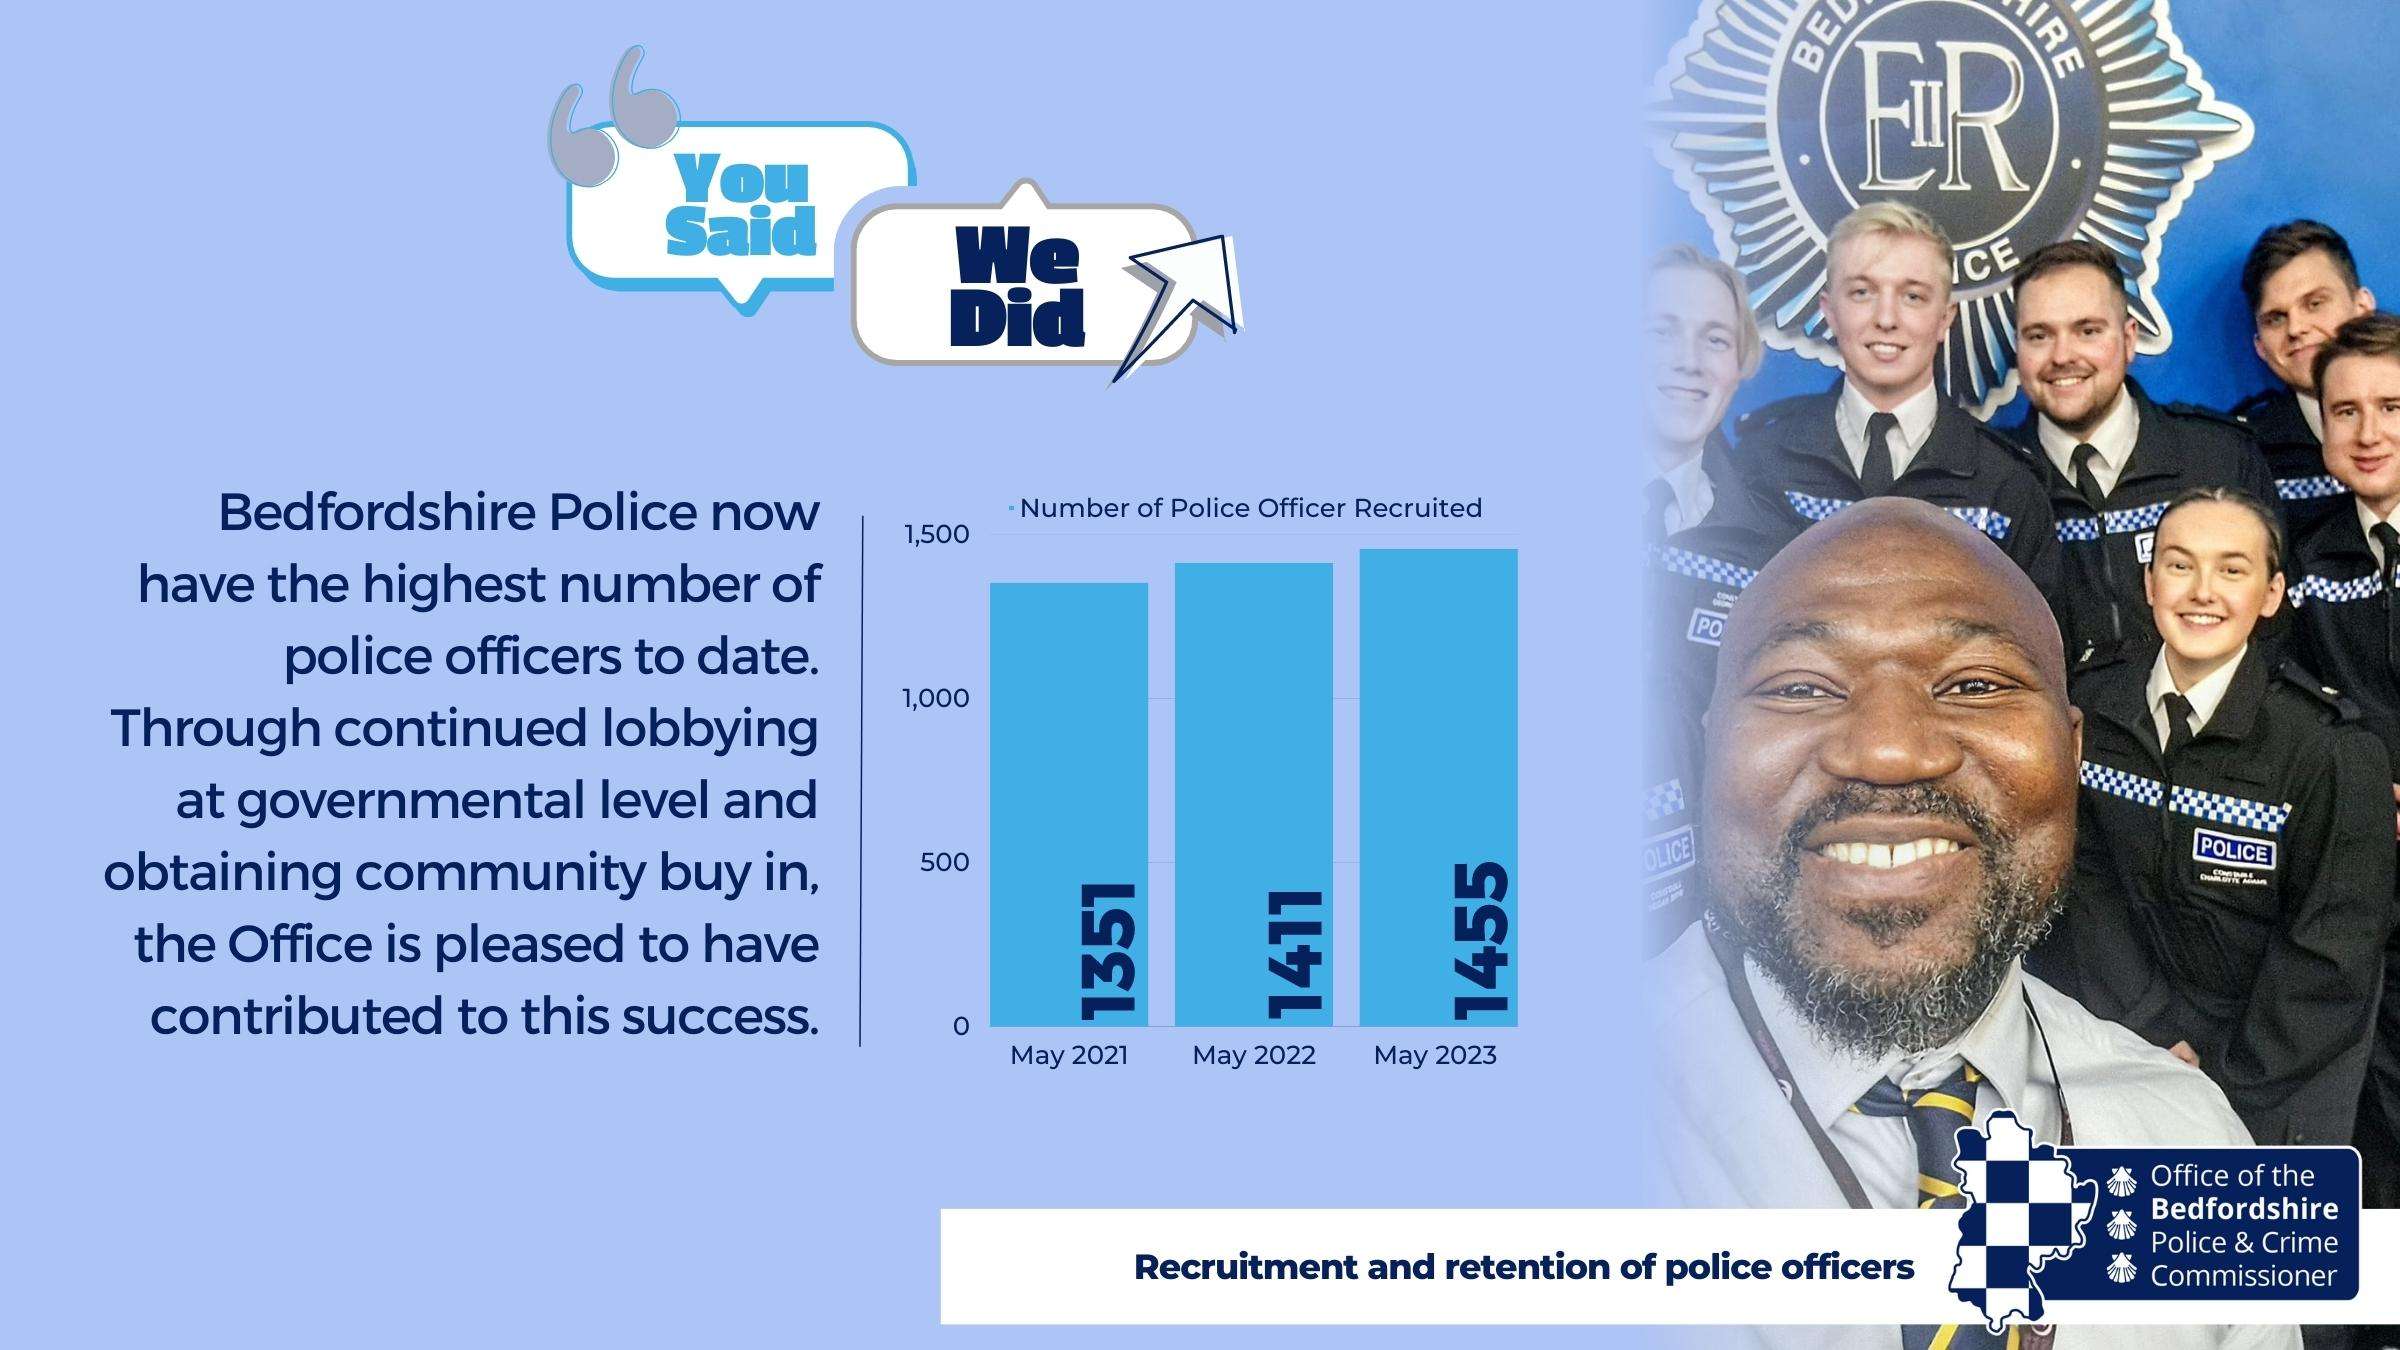 Priority 2, Recruitment and retention of police officers.